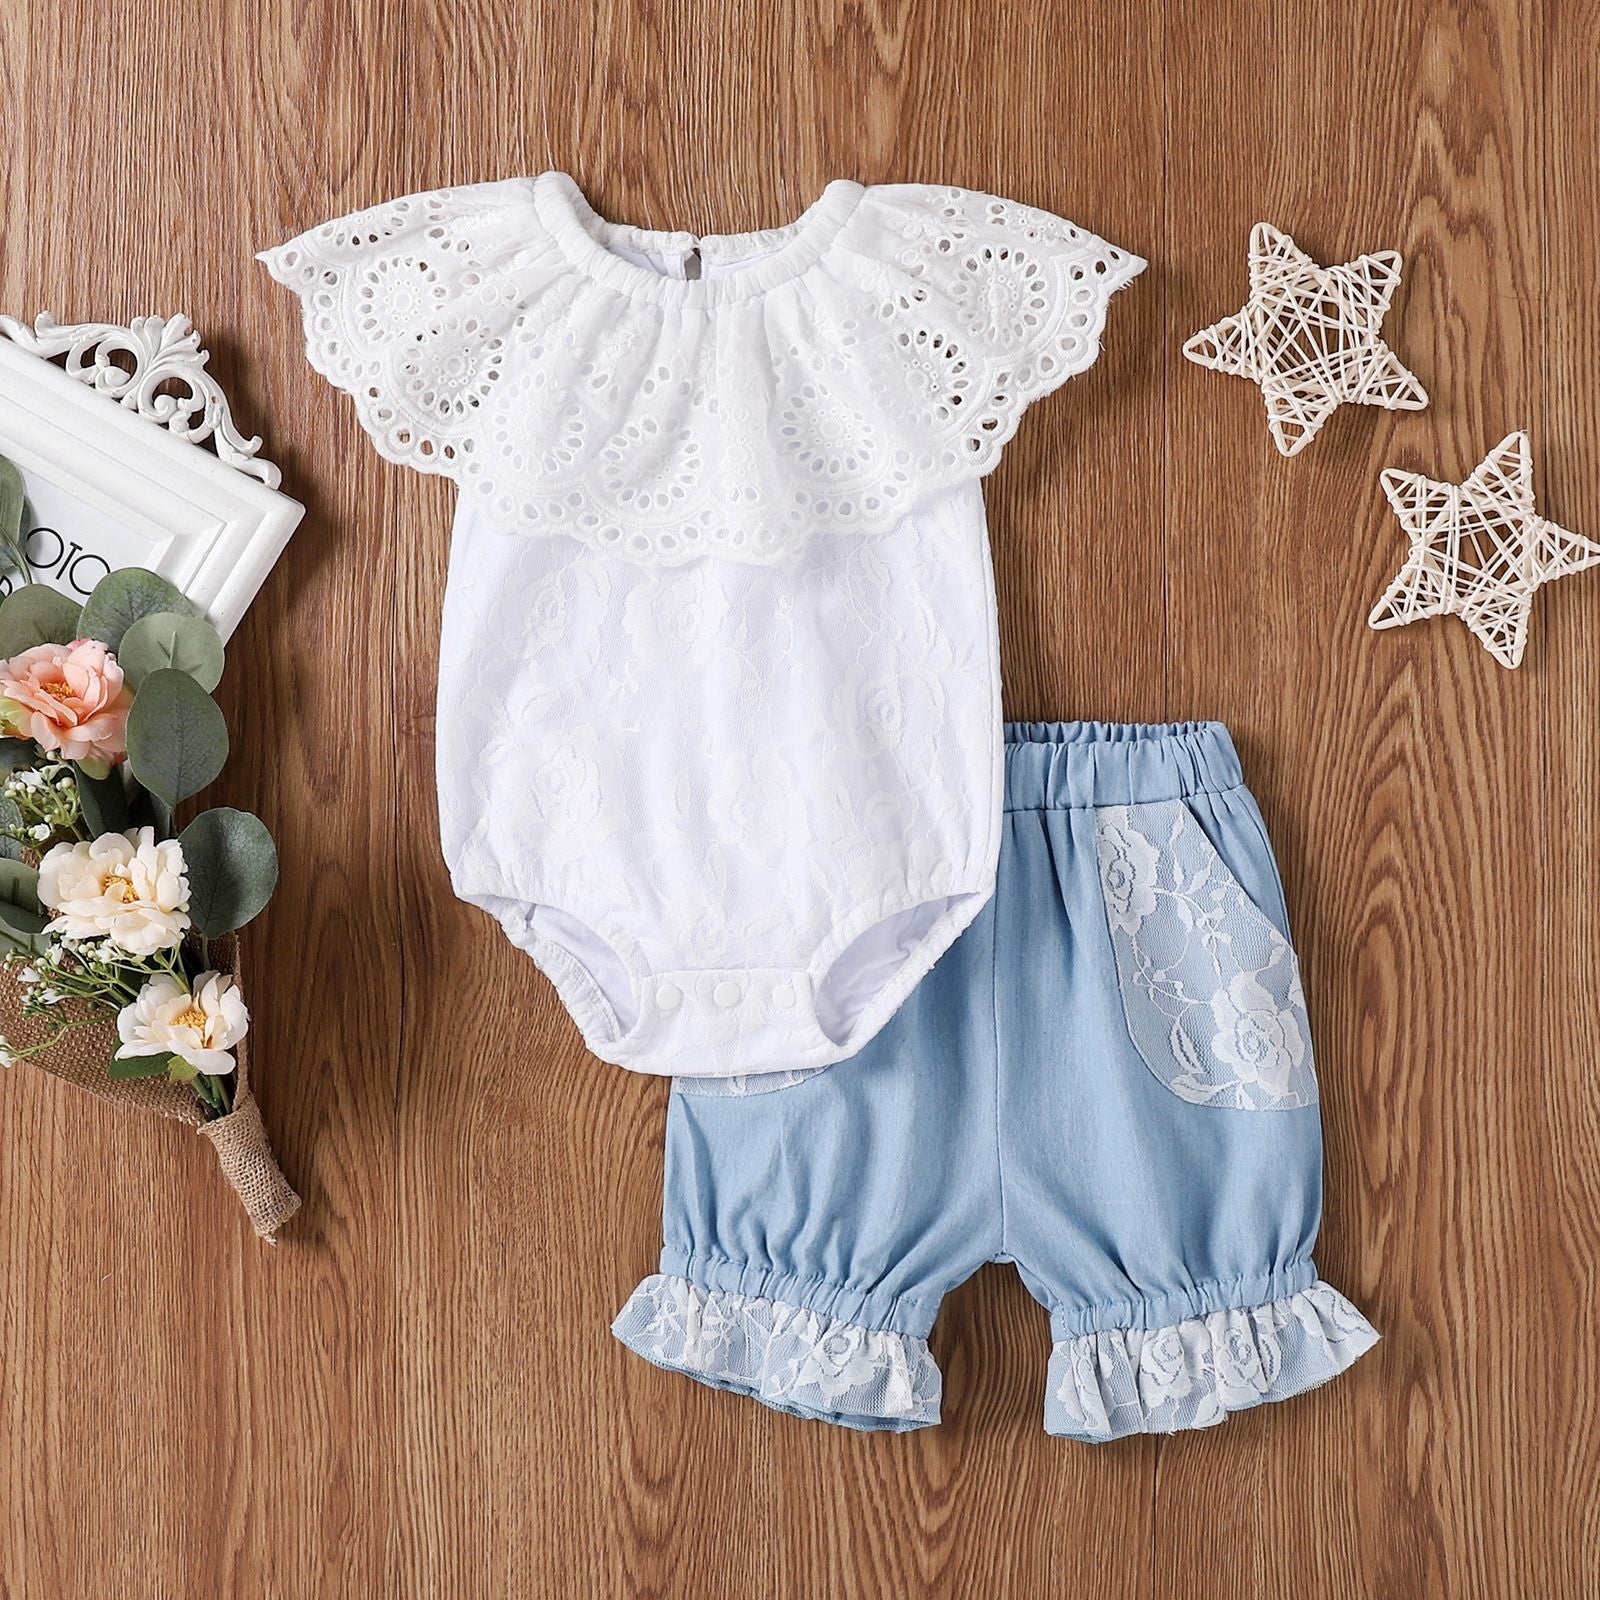 EBay Summer New Baby Girl 0-2 Years Old Lace Collar Dress Denim Shorts Two-piece Suit